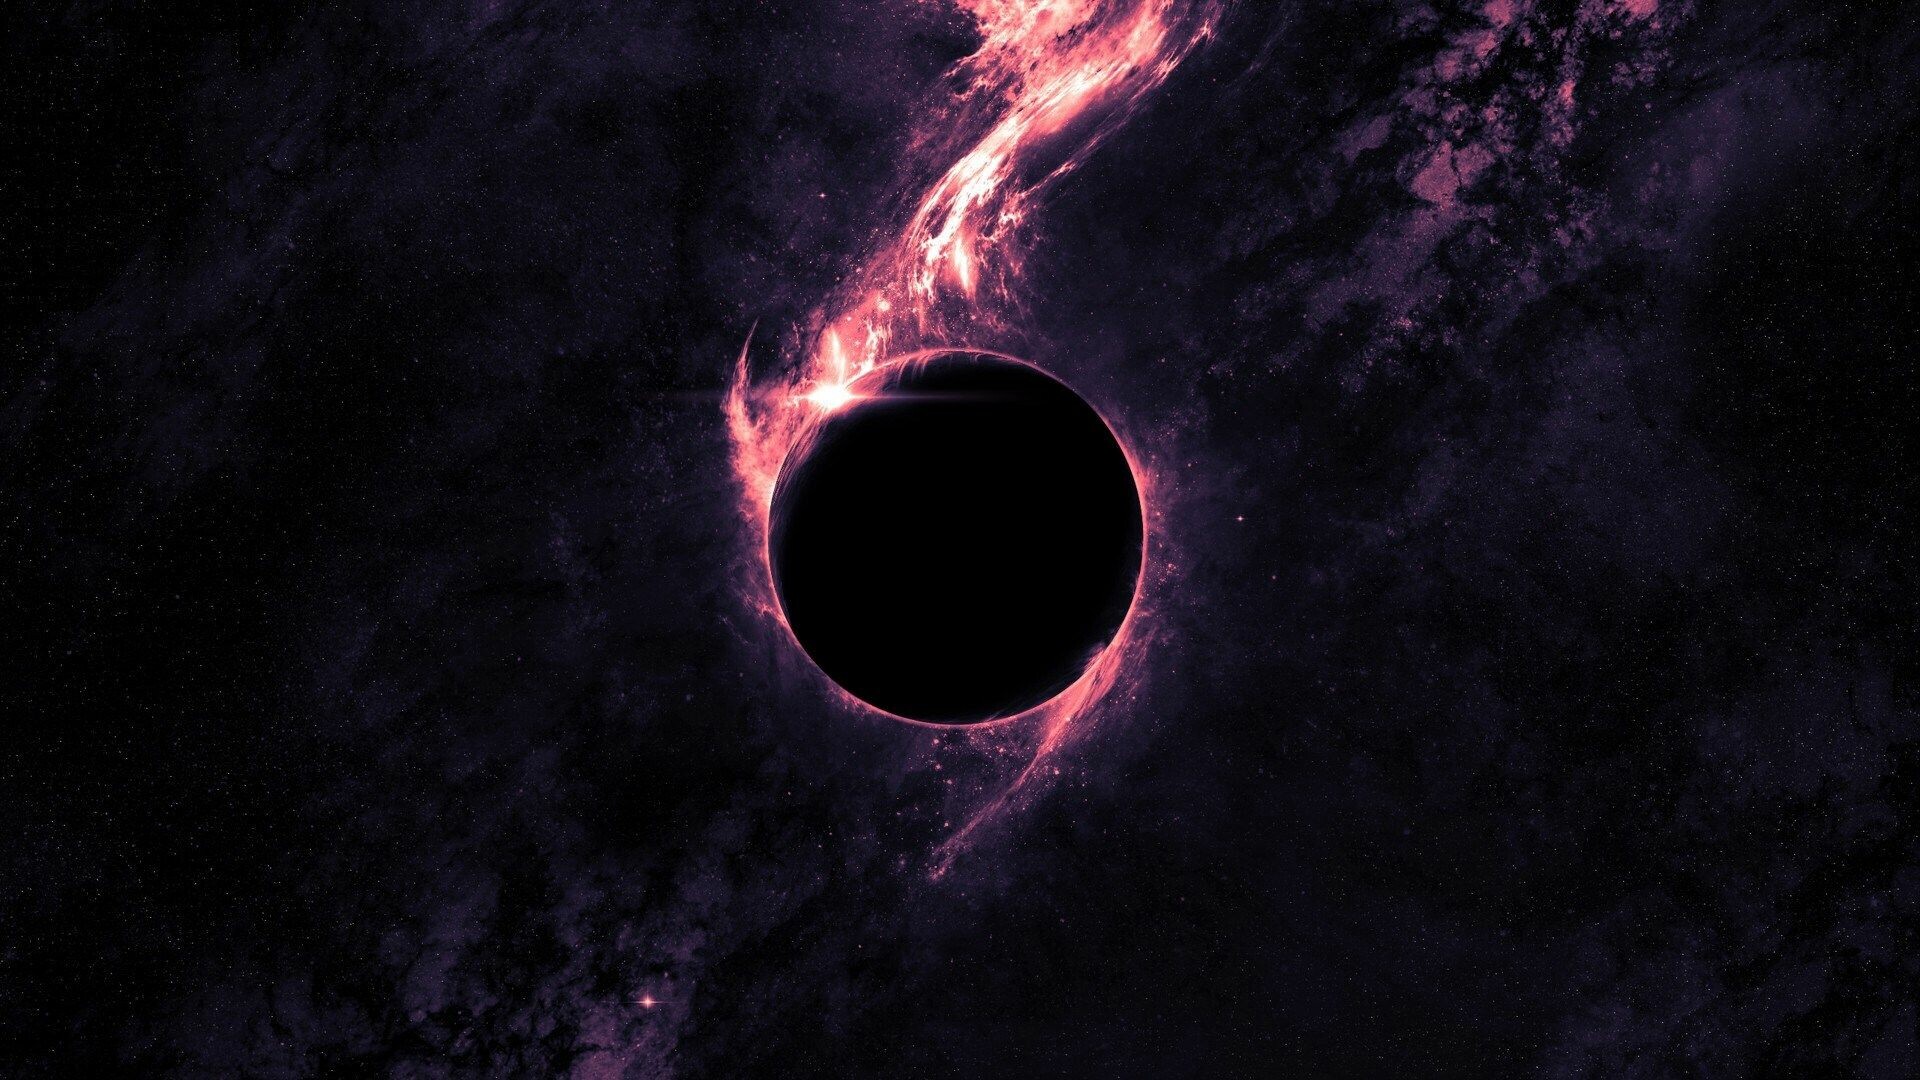 55+ Black Hole Wallpapers: HD, 4K, 5K for PC and Mobile | Download free  images for iPhone, Android